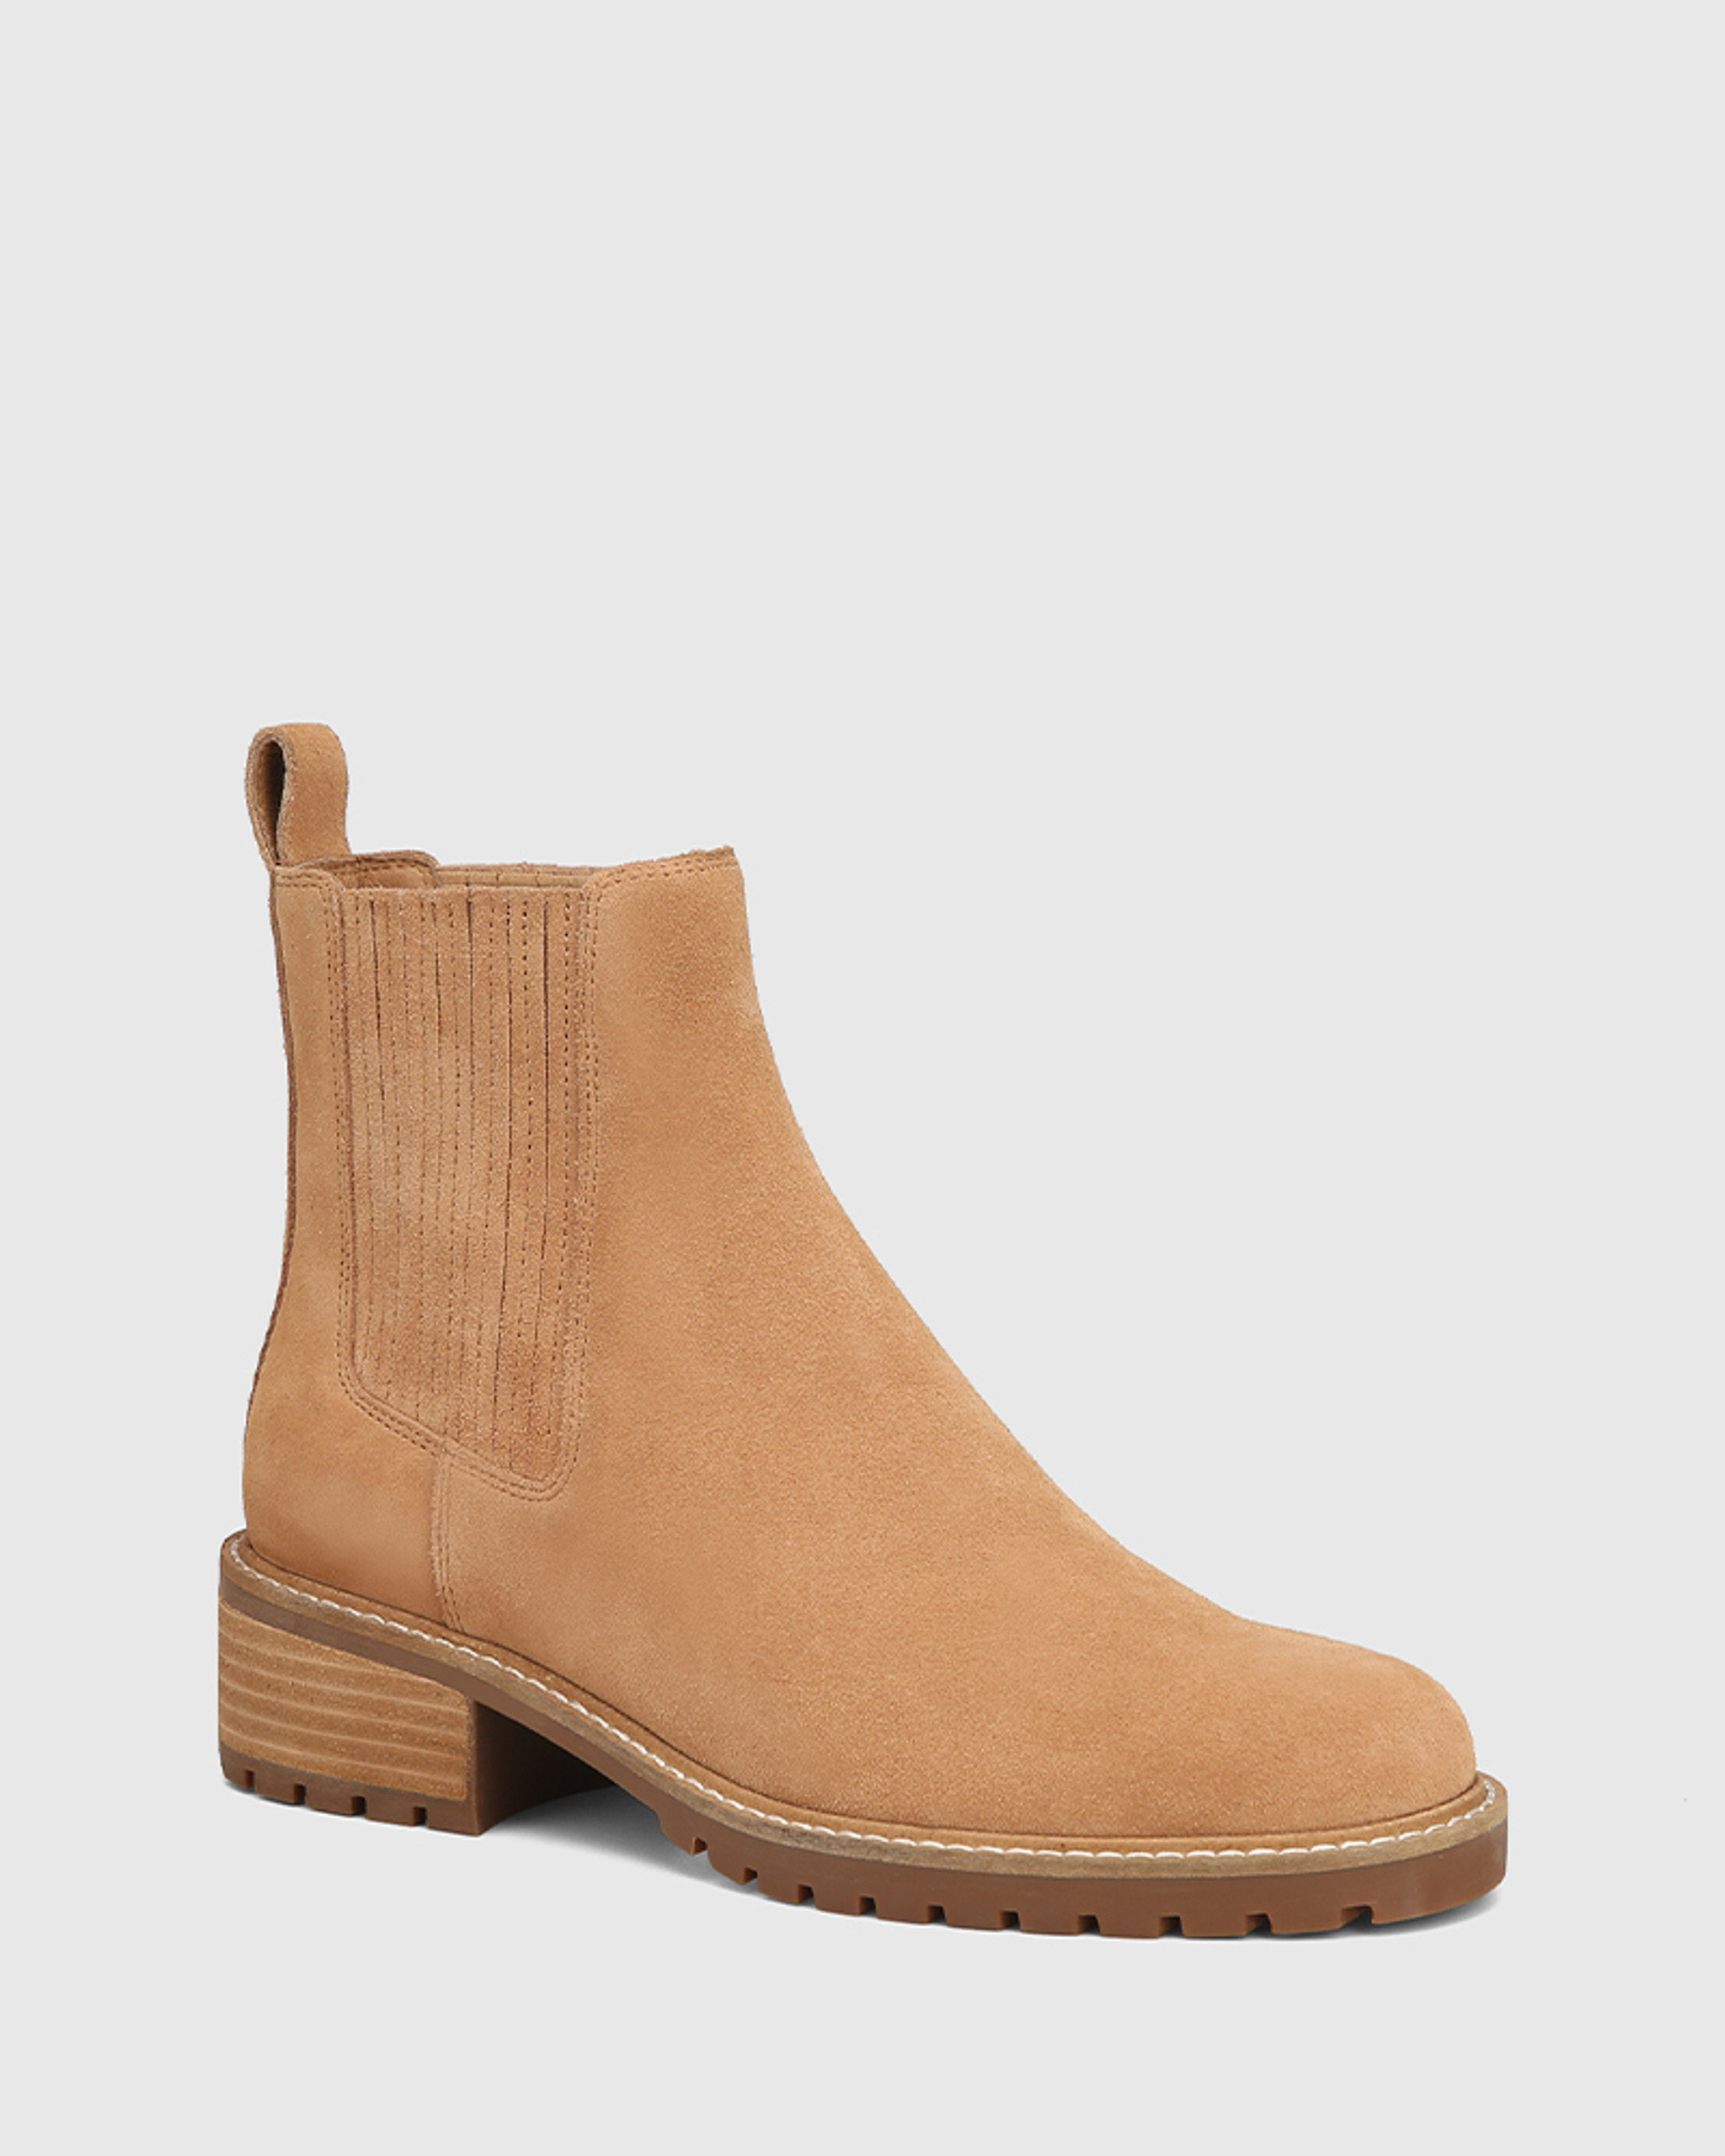 Fleetwood Camel Suede Leather Flat Ankle Boot